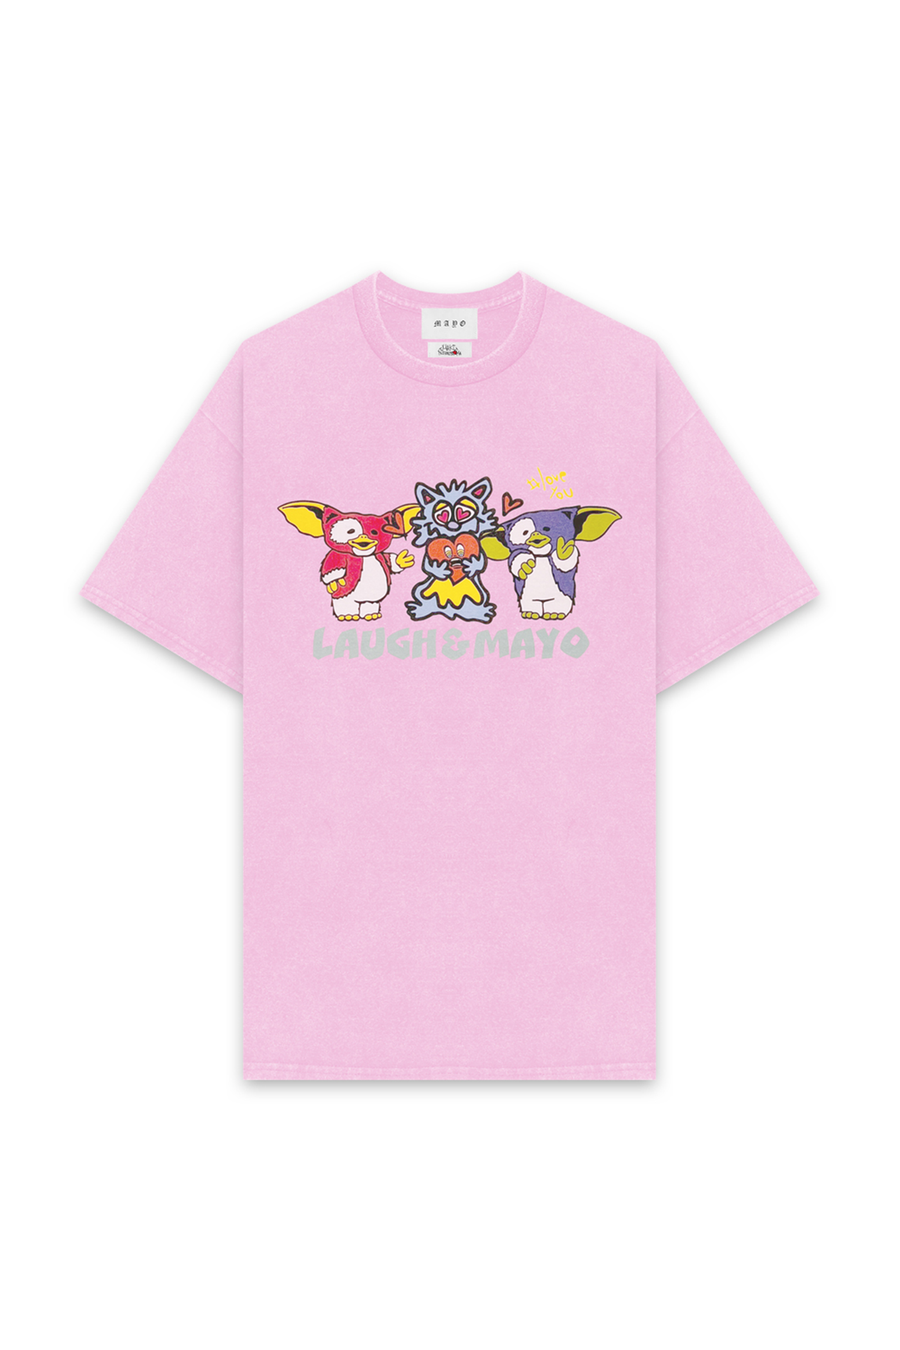 LAUGH & MAYO FRIENDS Short Sleeve Tee - PINK